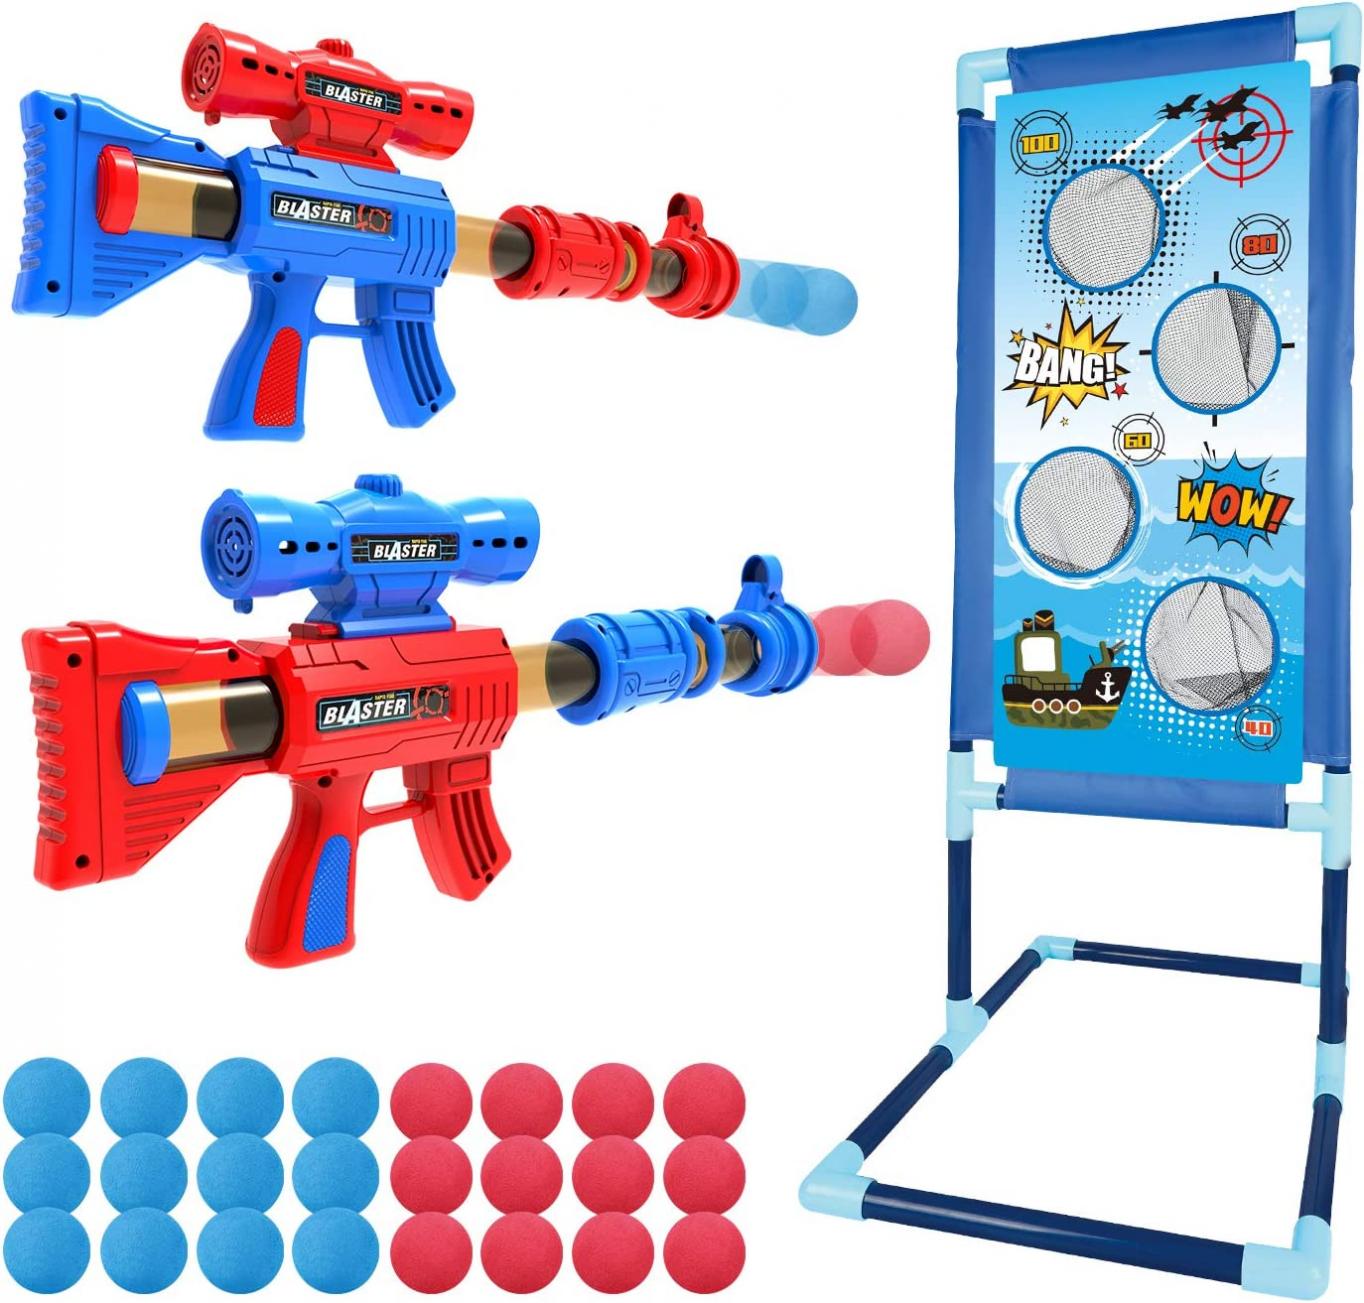 YEEBAY Shooting Game Toy for Age 6, 7, 8,9,10+ Years Old Kids, Boys - 2pk Foam Ball Popper Air Guns & Shooting Target & 24 Foam Balls - Ideal Gift - Compatible with Toy Guns